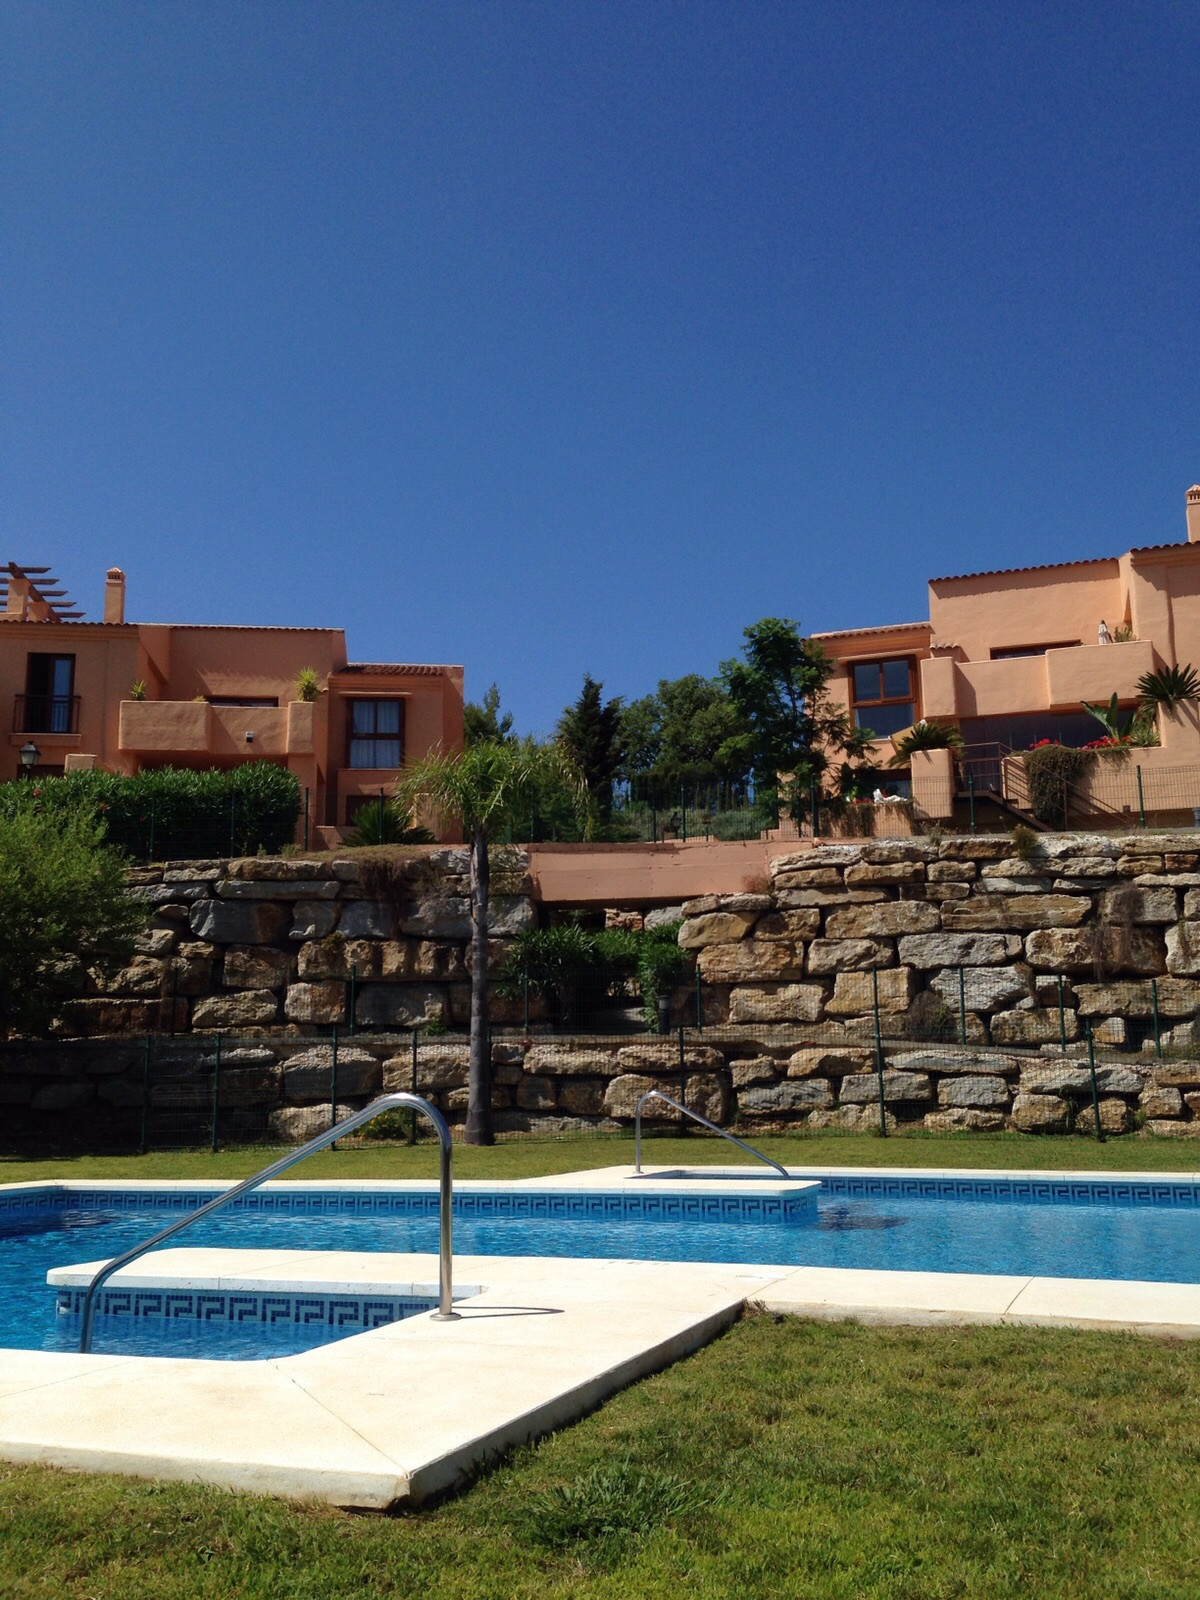 						Apartment  Middle Floor
													for sale 
																			 in La Mairena
					